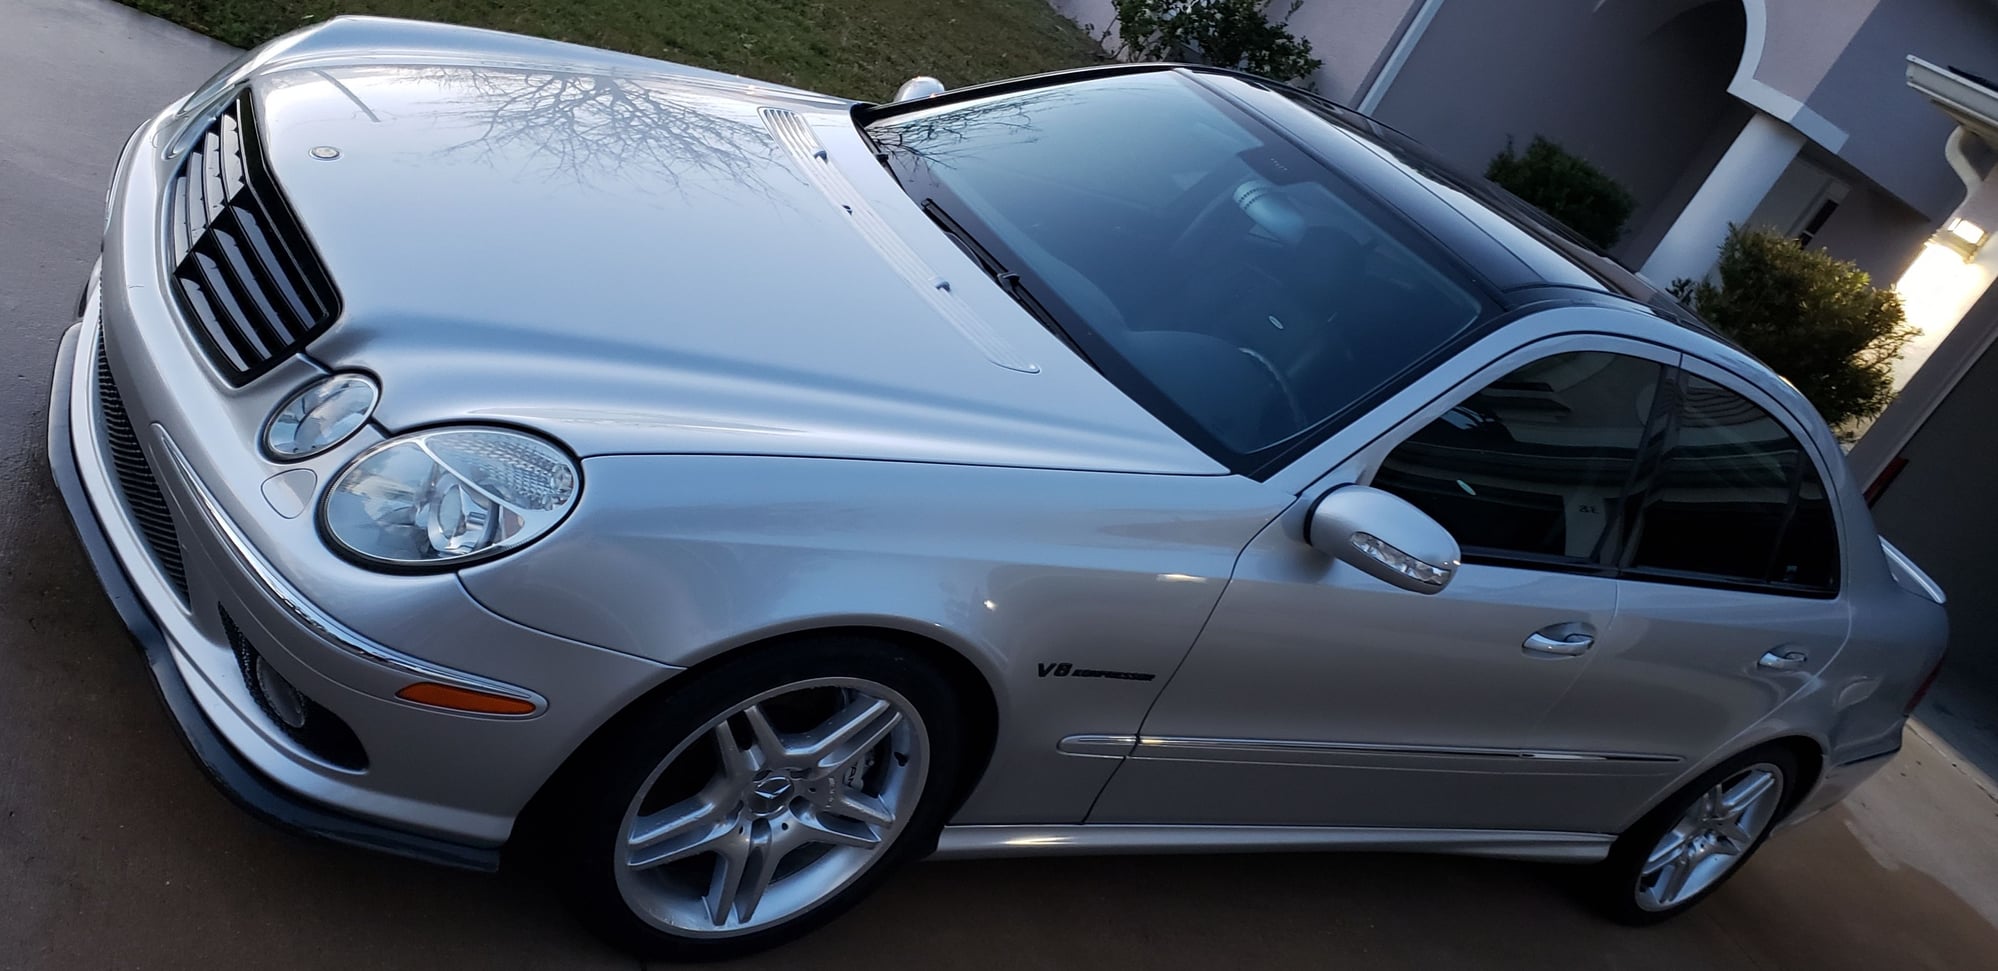 2003 Mercedes-Benz E55 AMG - 2003 E55 AMG 56k Very Clean, Stock, Never abused, Adult owned. - Used - VIN WDBUF76J53A379857 - 8 cyl - 2WD - Automatic - Sedan - Silver - Palm Coast, FL 32164, United States